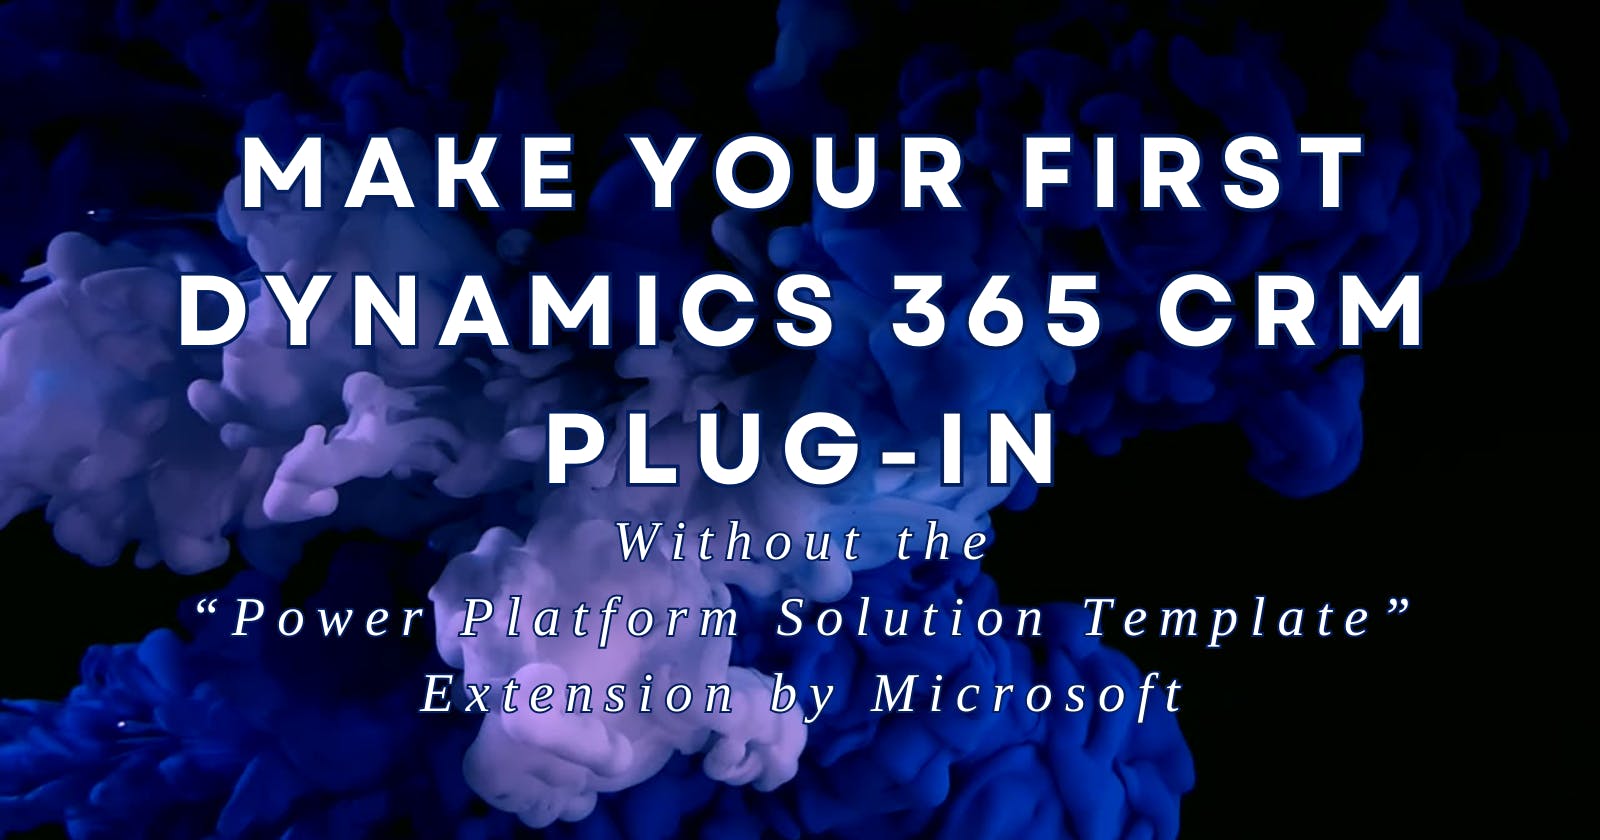 Make your first Dynamics 365 CRM Plugin without the “Power Platform Solution Template” Extension by Microsoft